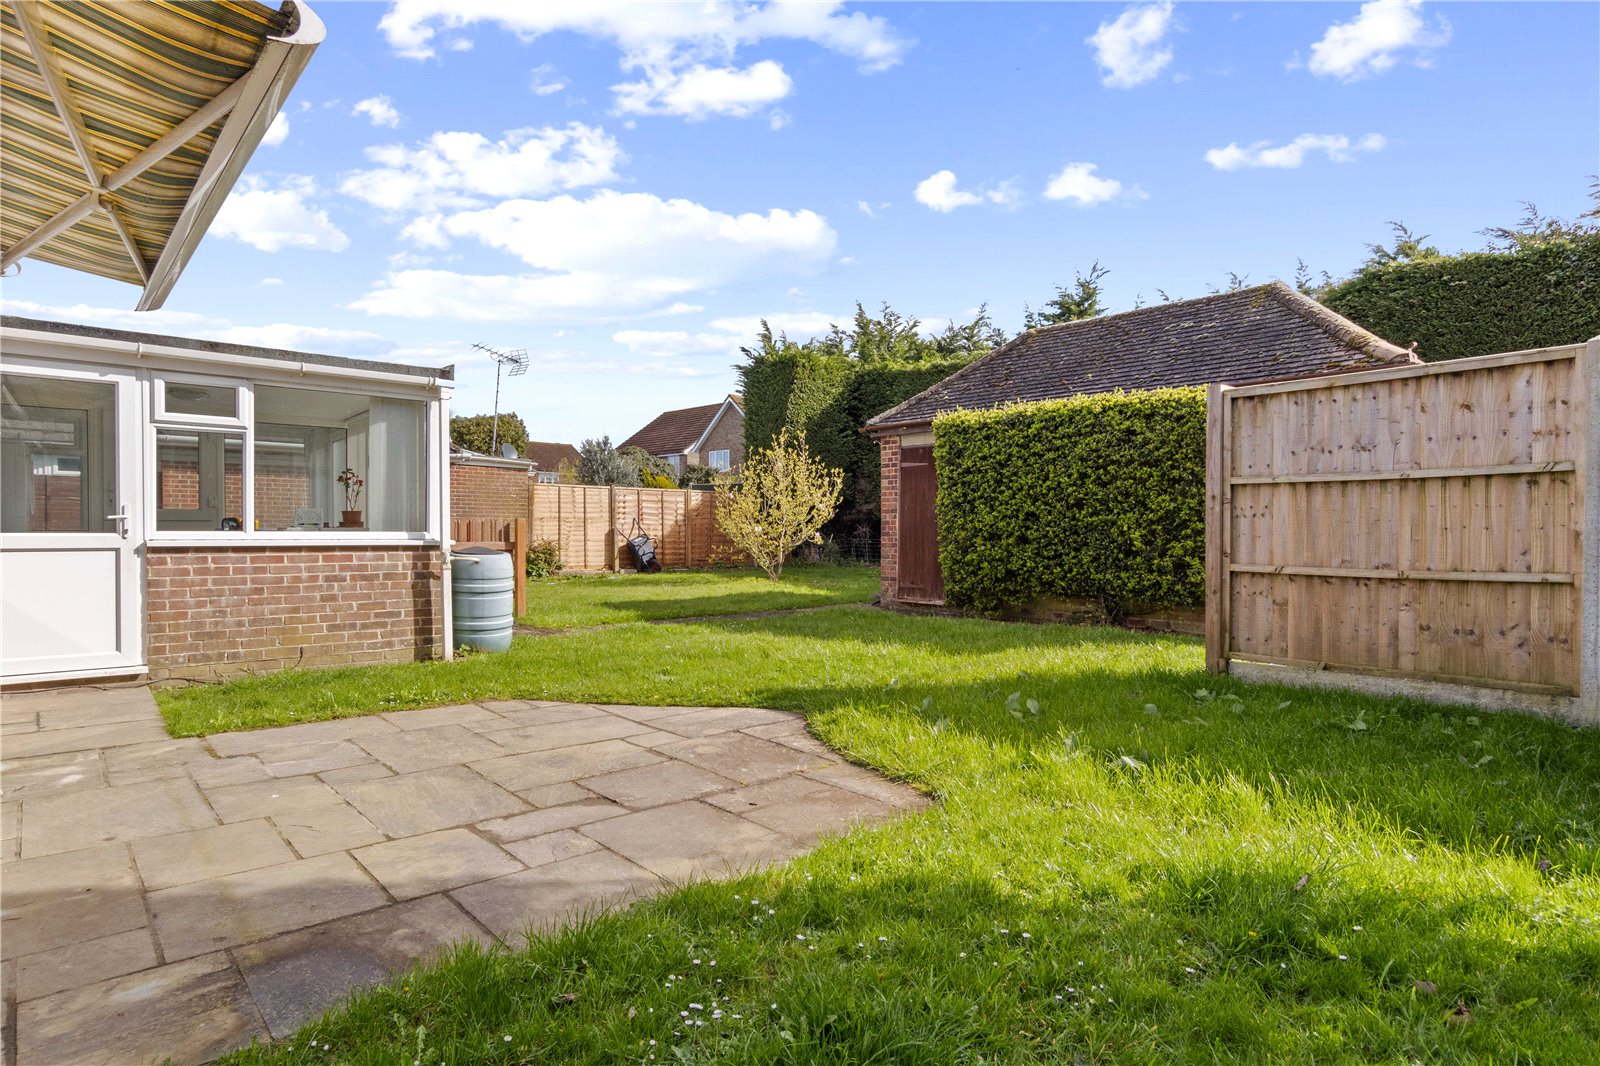 3 bed bungalow for sale in Westergate Street, Woodgate  - Property Image 11